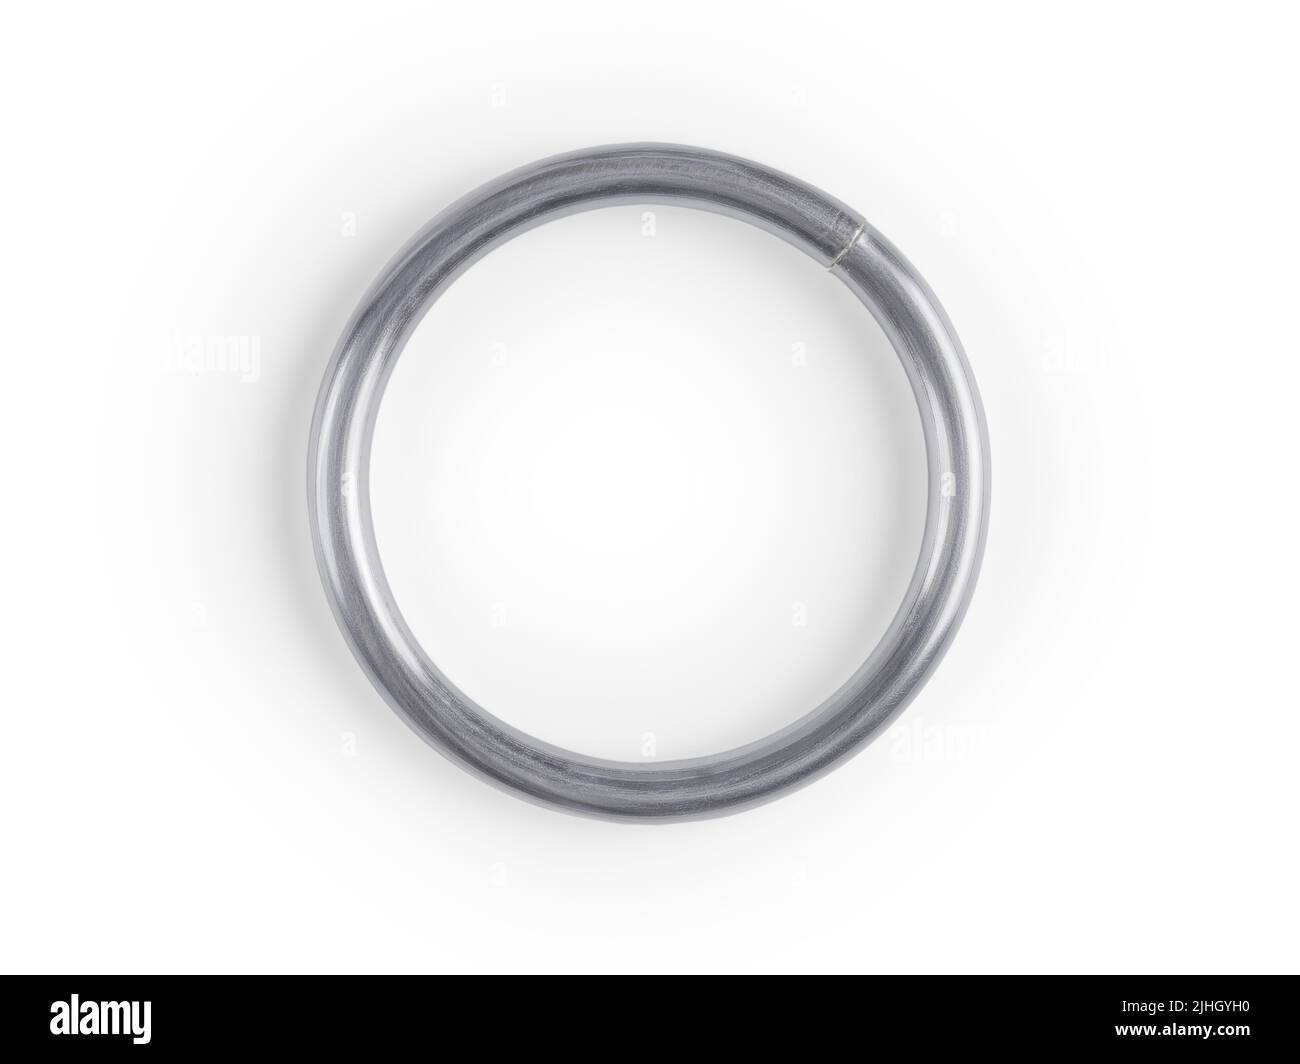 Silver colored metallic ring. Steel ring isolated on white background, clipping path included Stock Photo